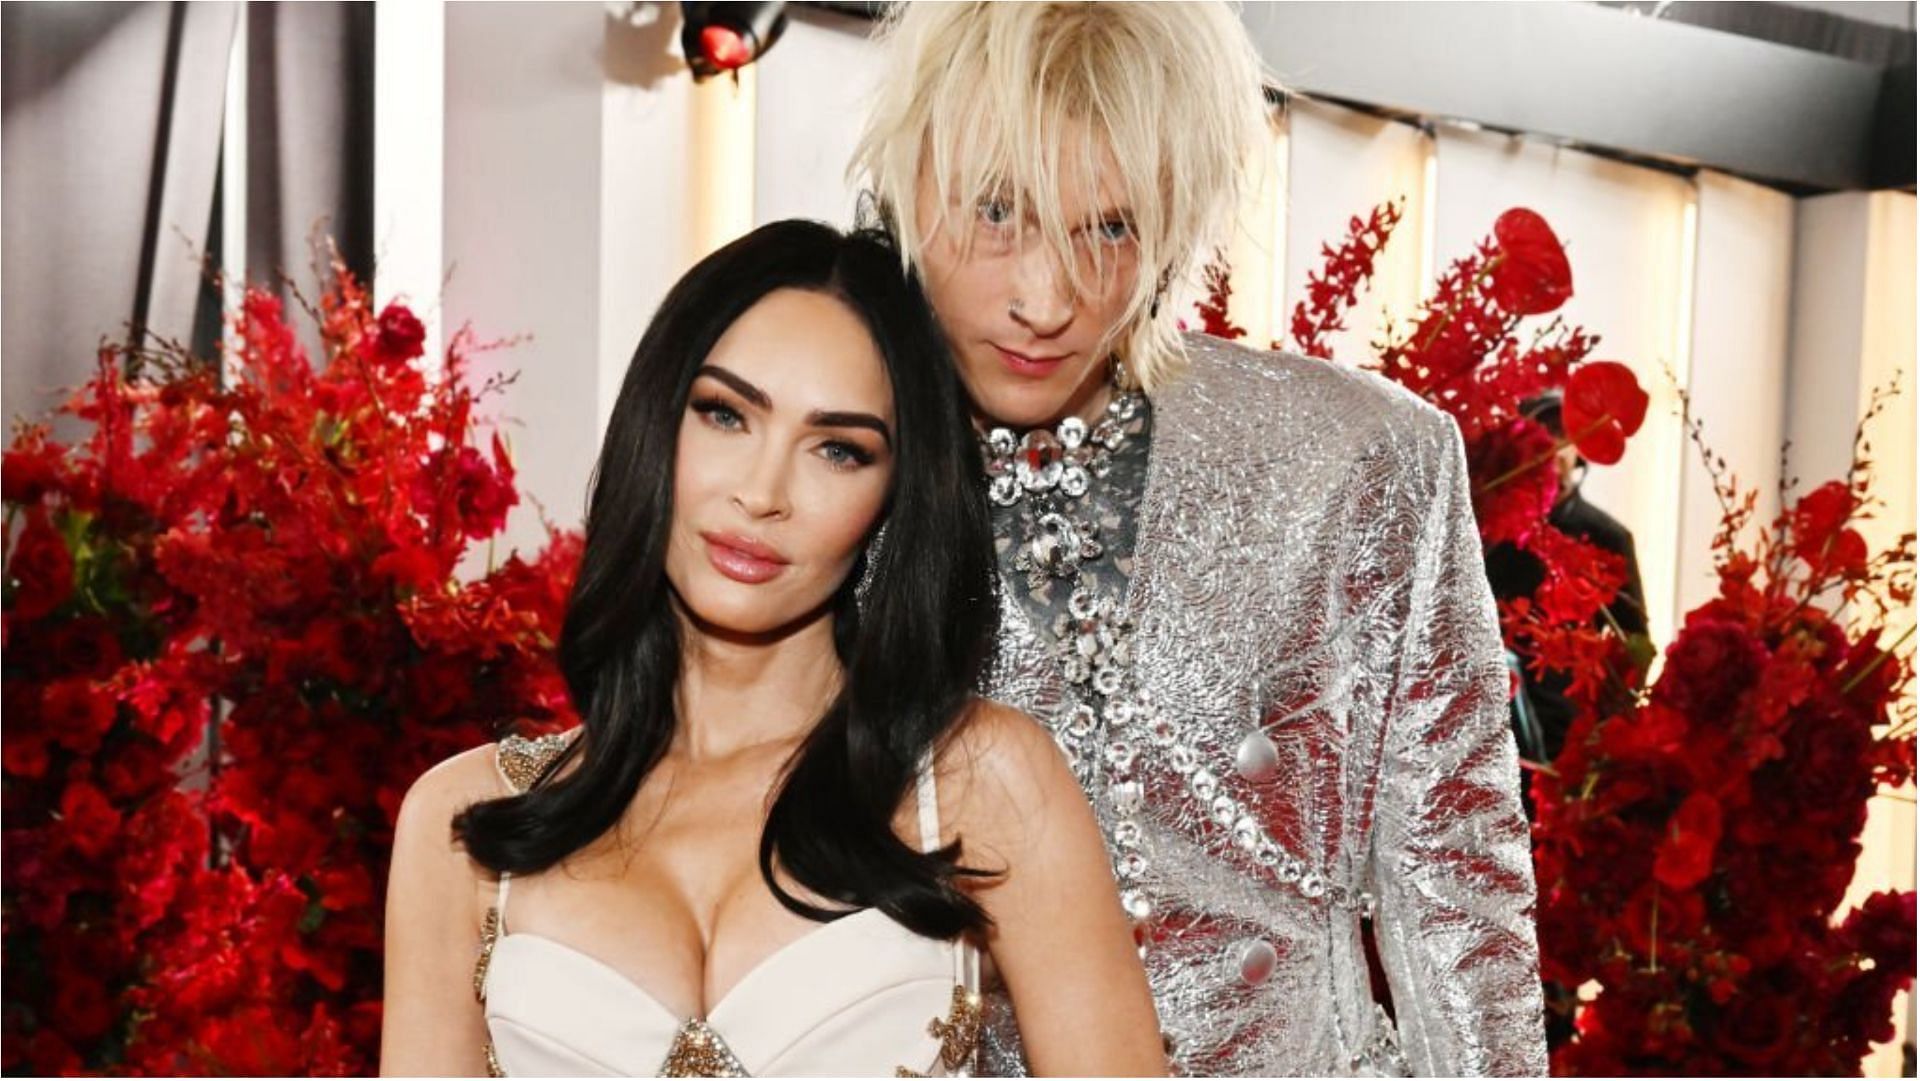 Megan Fox and Machine Gun Kelly attend the 65th GRAMMY Awards (Image via Lester Cohen/Getty Images)